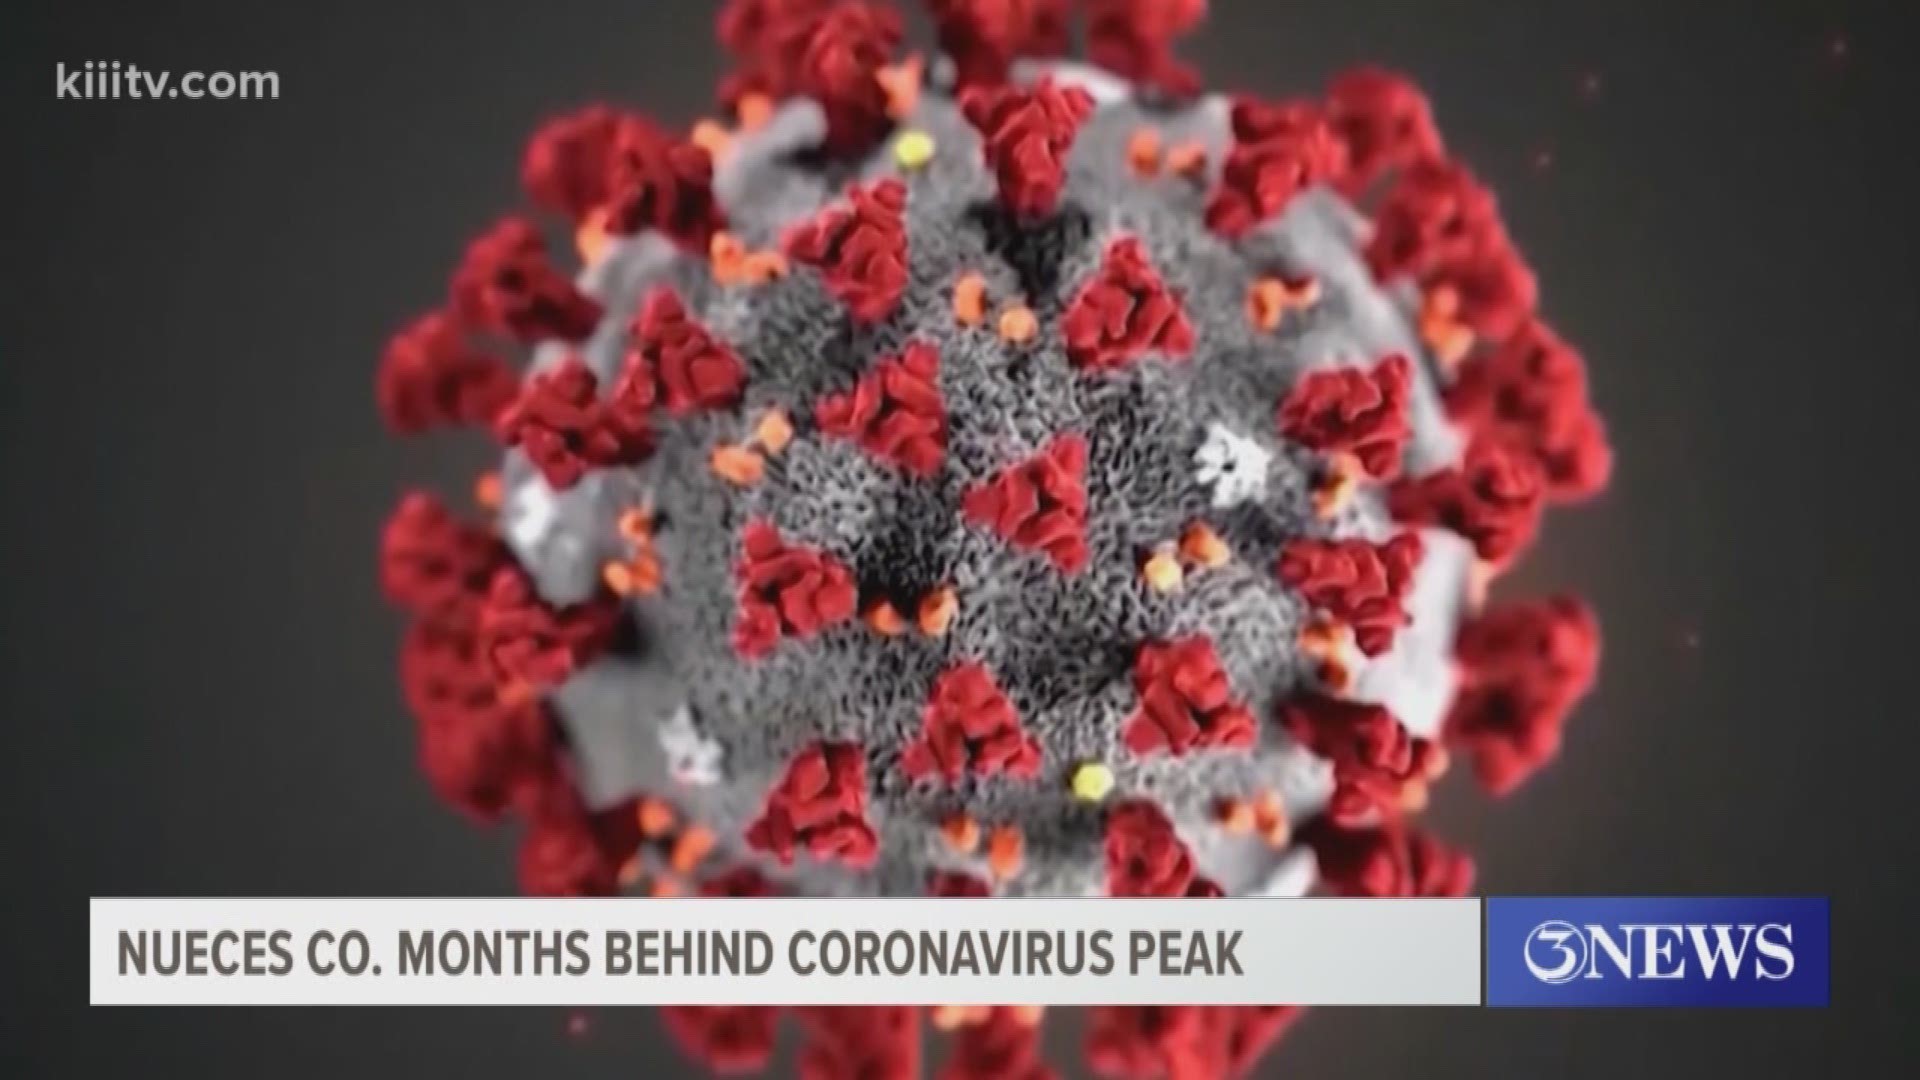 According to at least one local health expert, it could be another three months before Nueces County reaches the peak of COVID-19 cases.